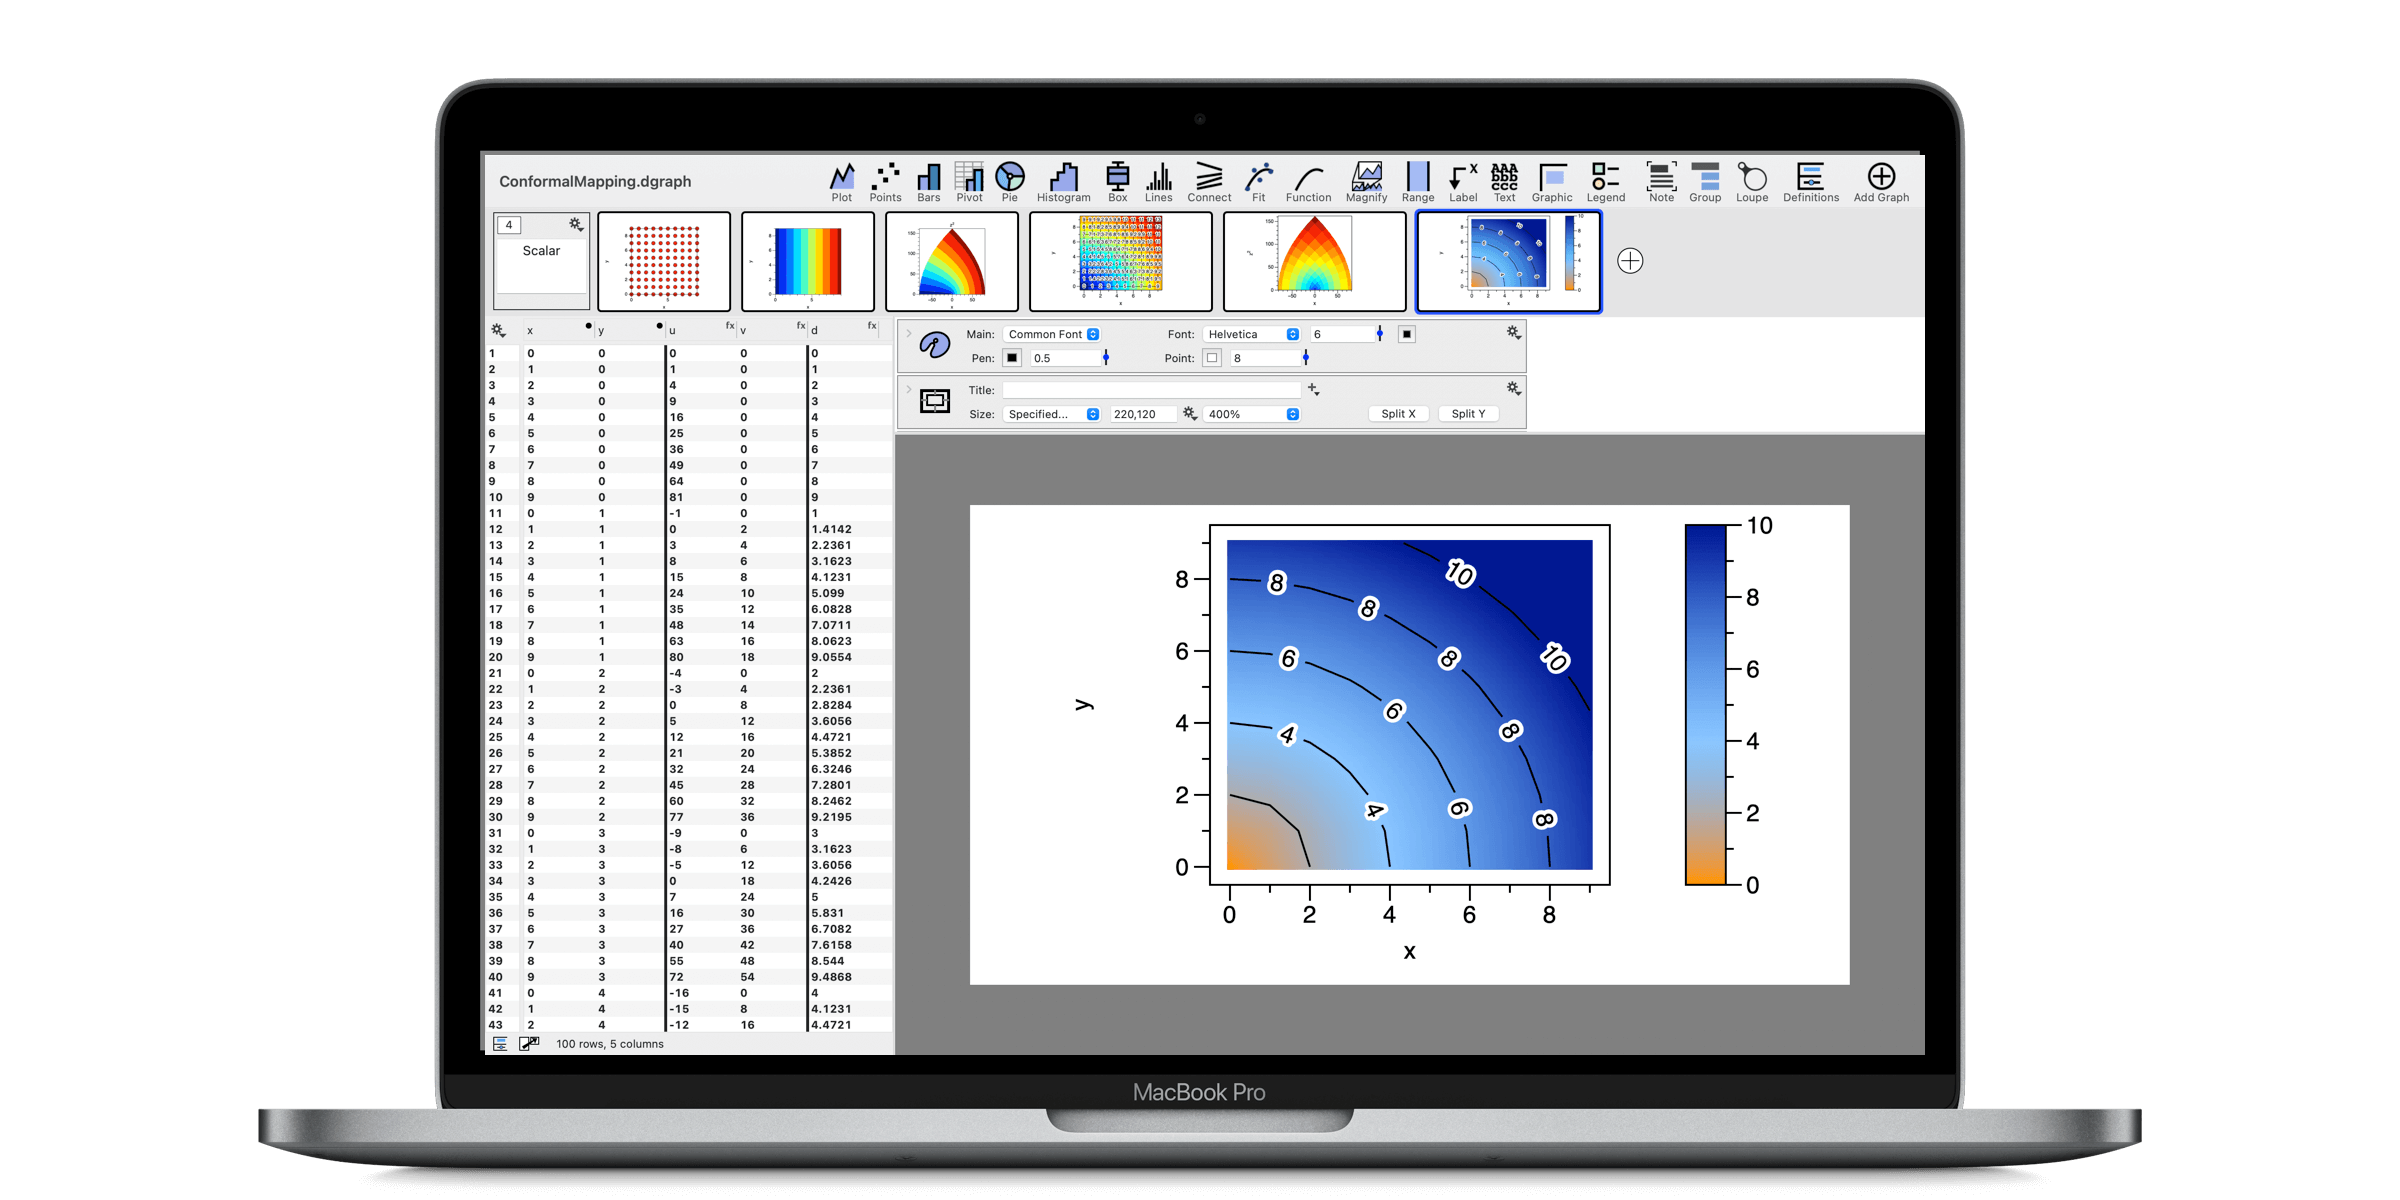 What’s new in Datagraph 4.7